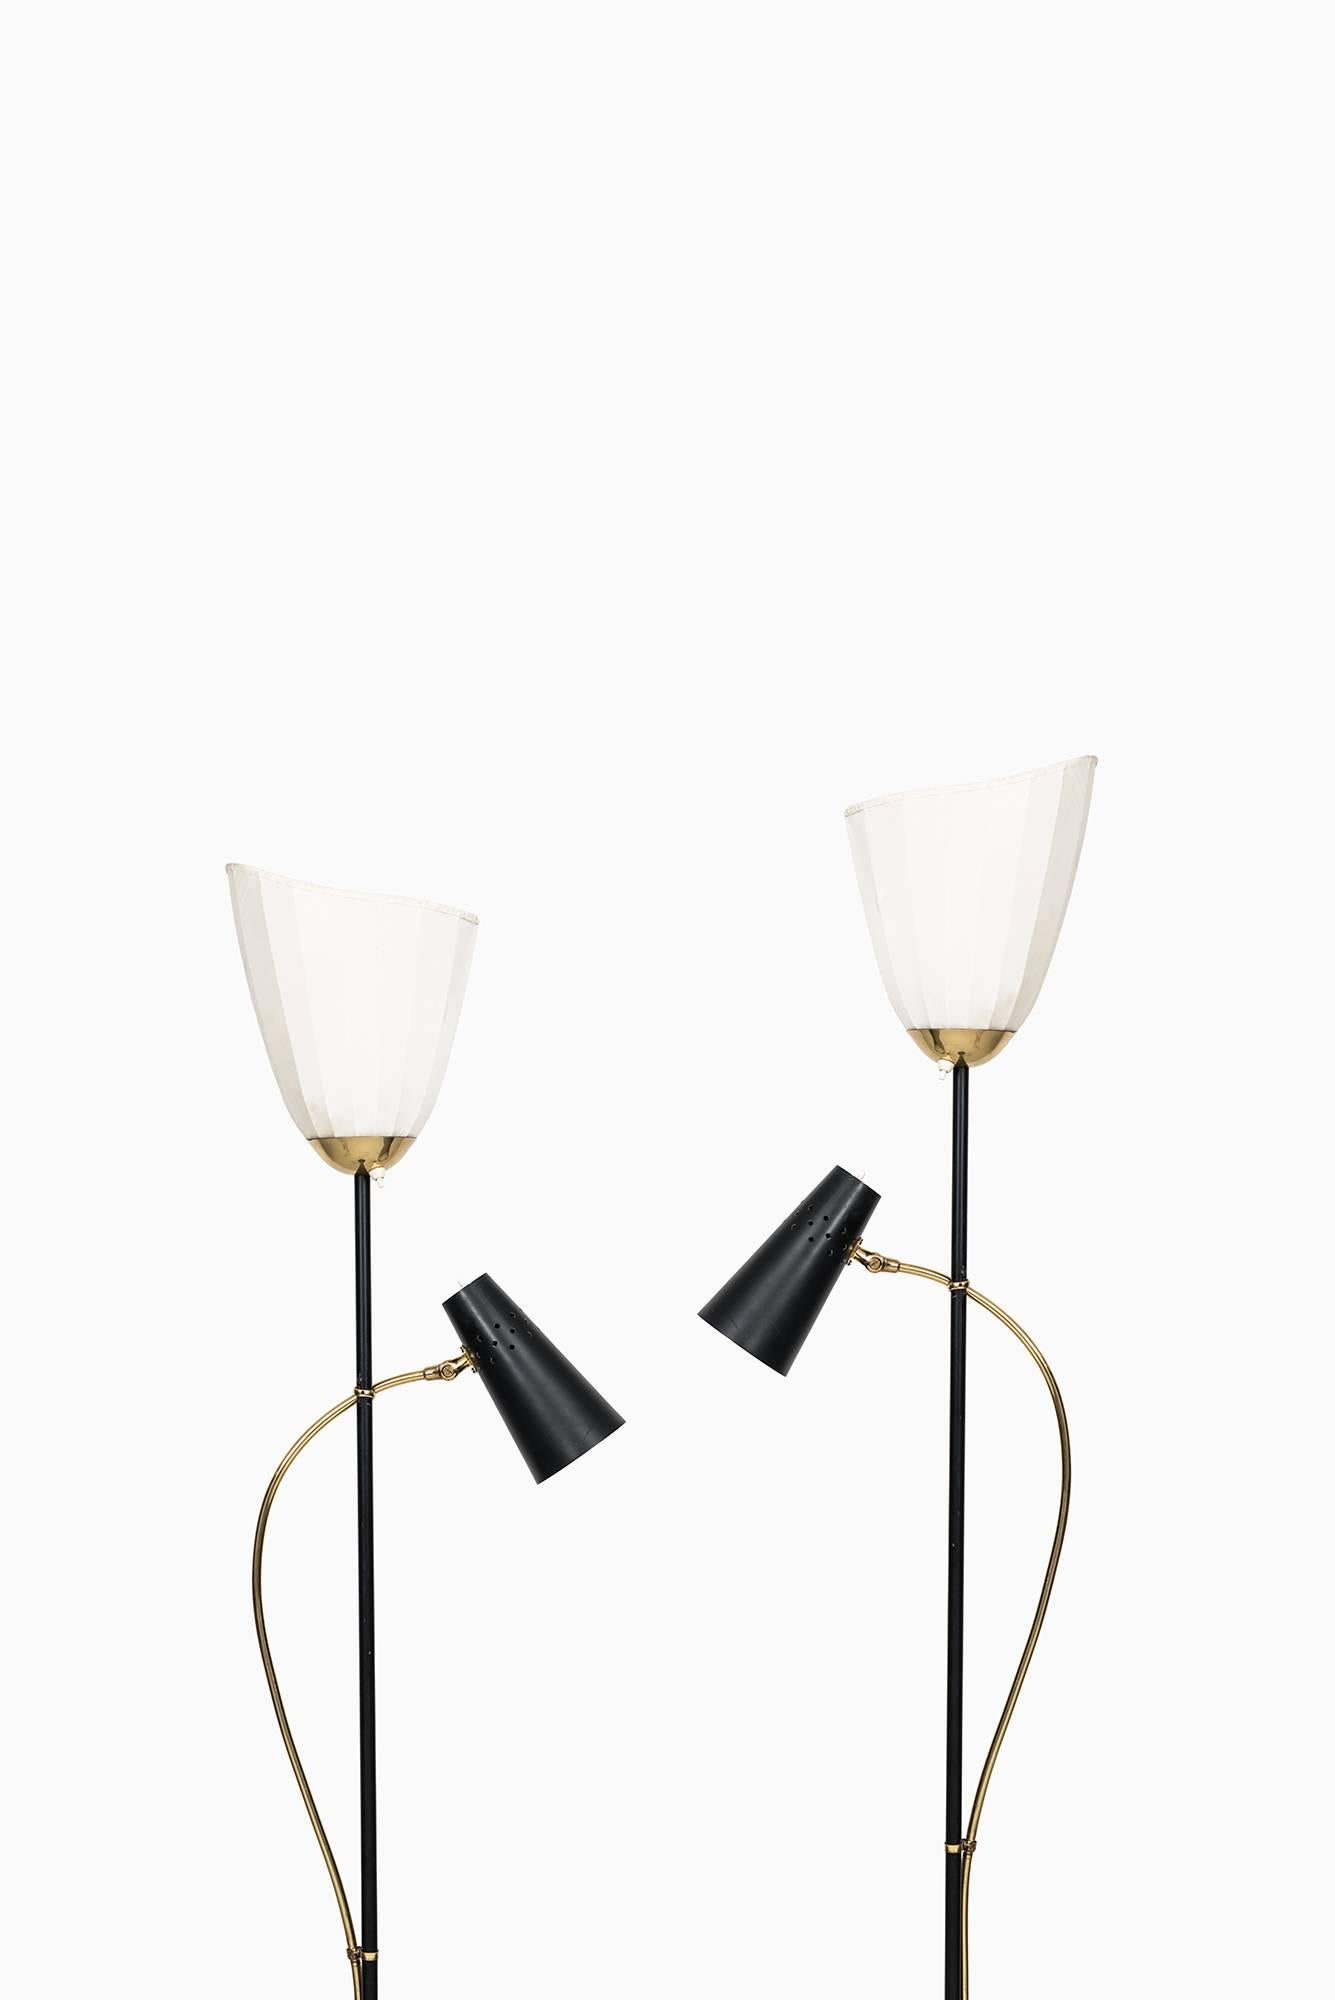 Rare pair of floor lamps produced in Sweden.